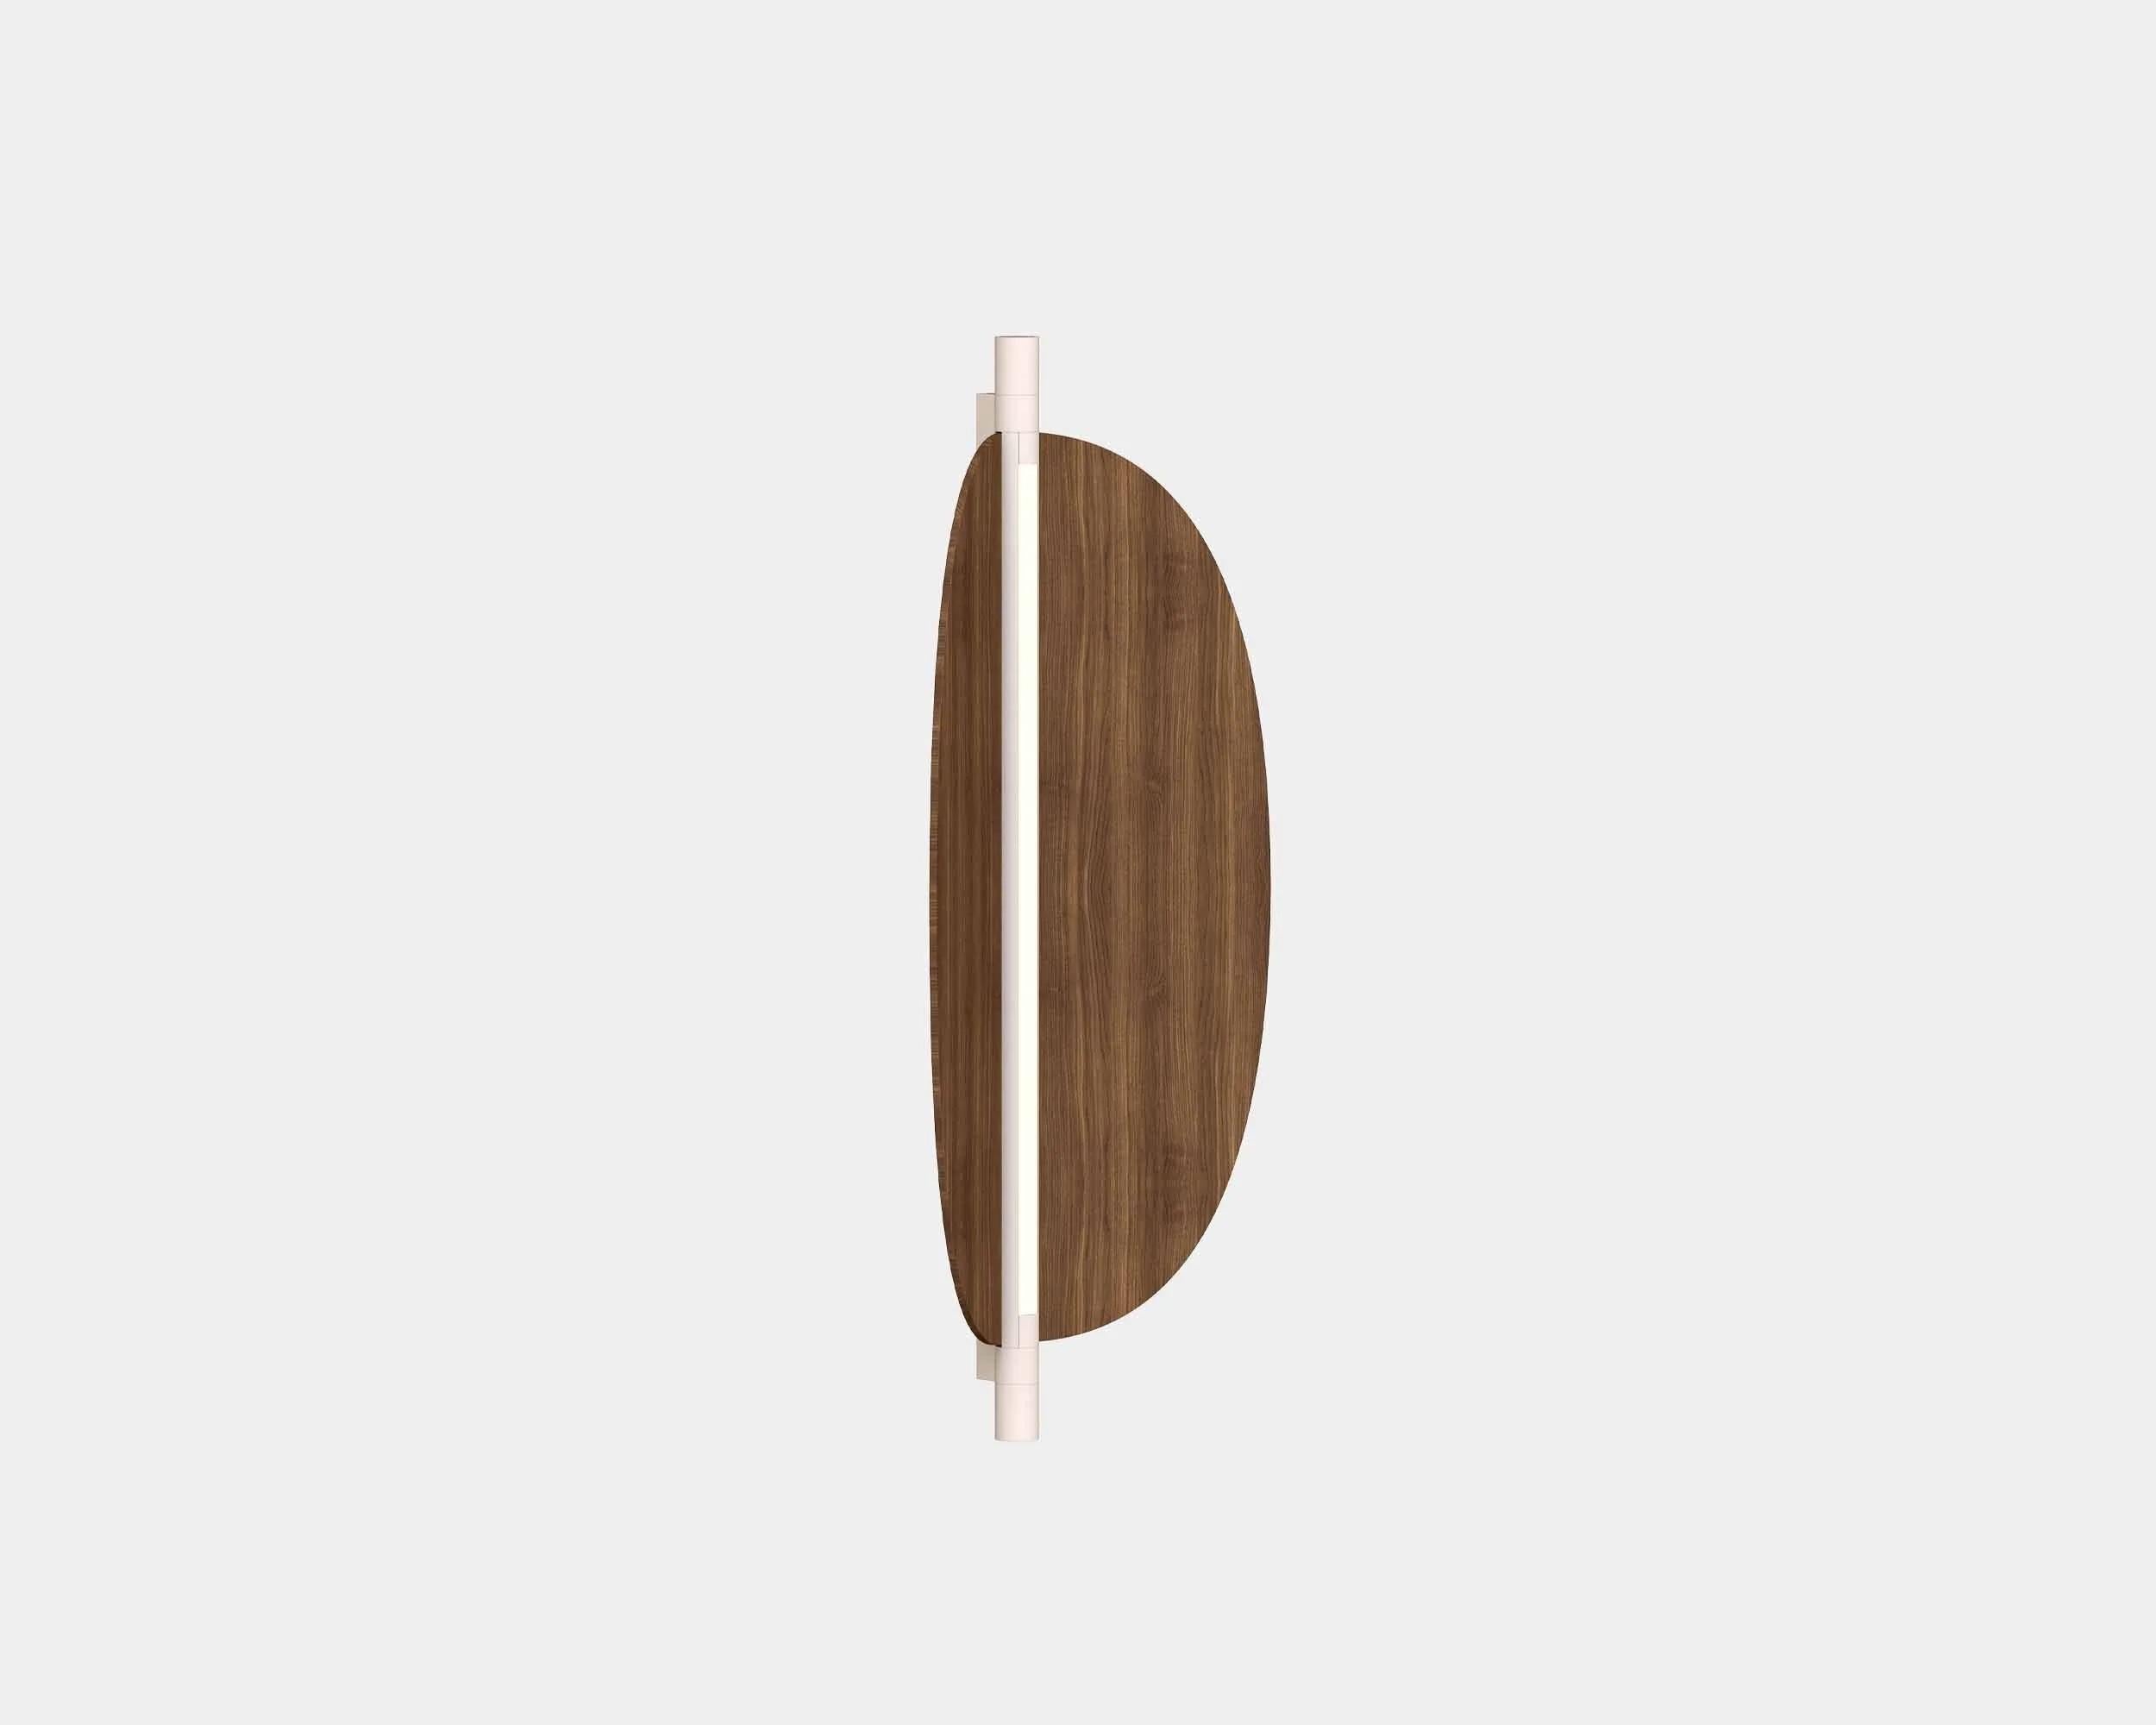 Contemporary Wall Lamp 'Thula 562.43' by Federica Biasi x Tooy, Black + Walnut For Sale 7